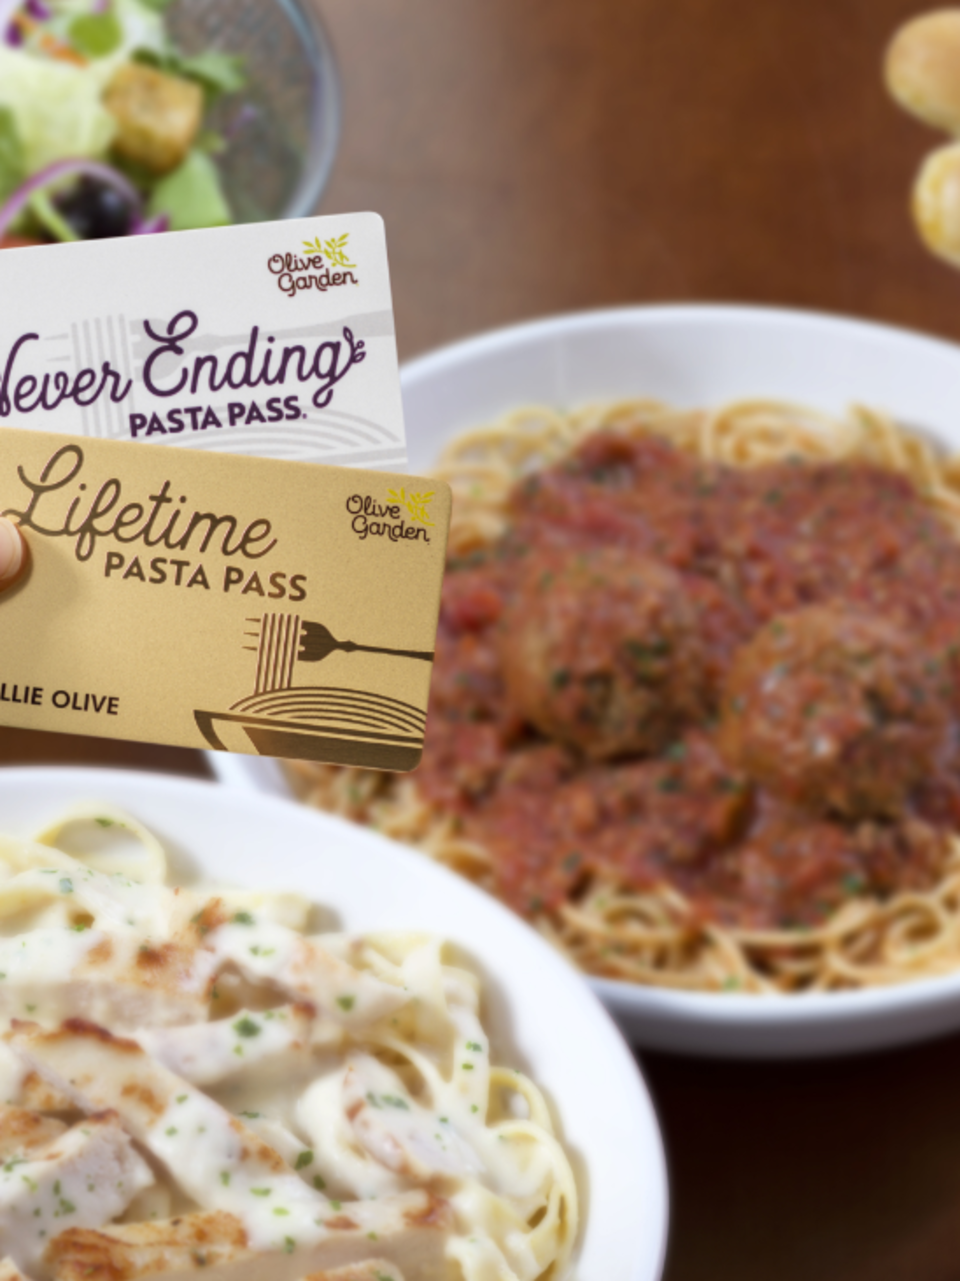 Olive Garden To Offer Lifetime Pasta Pass Wset